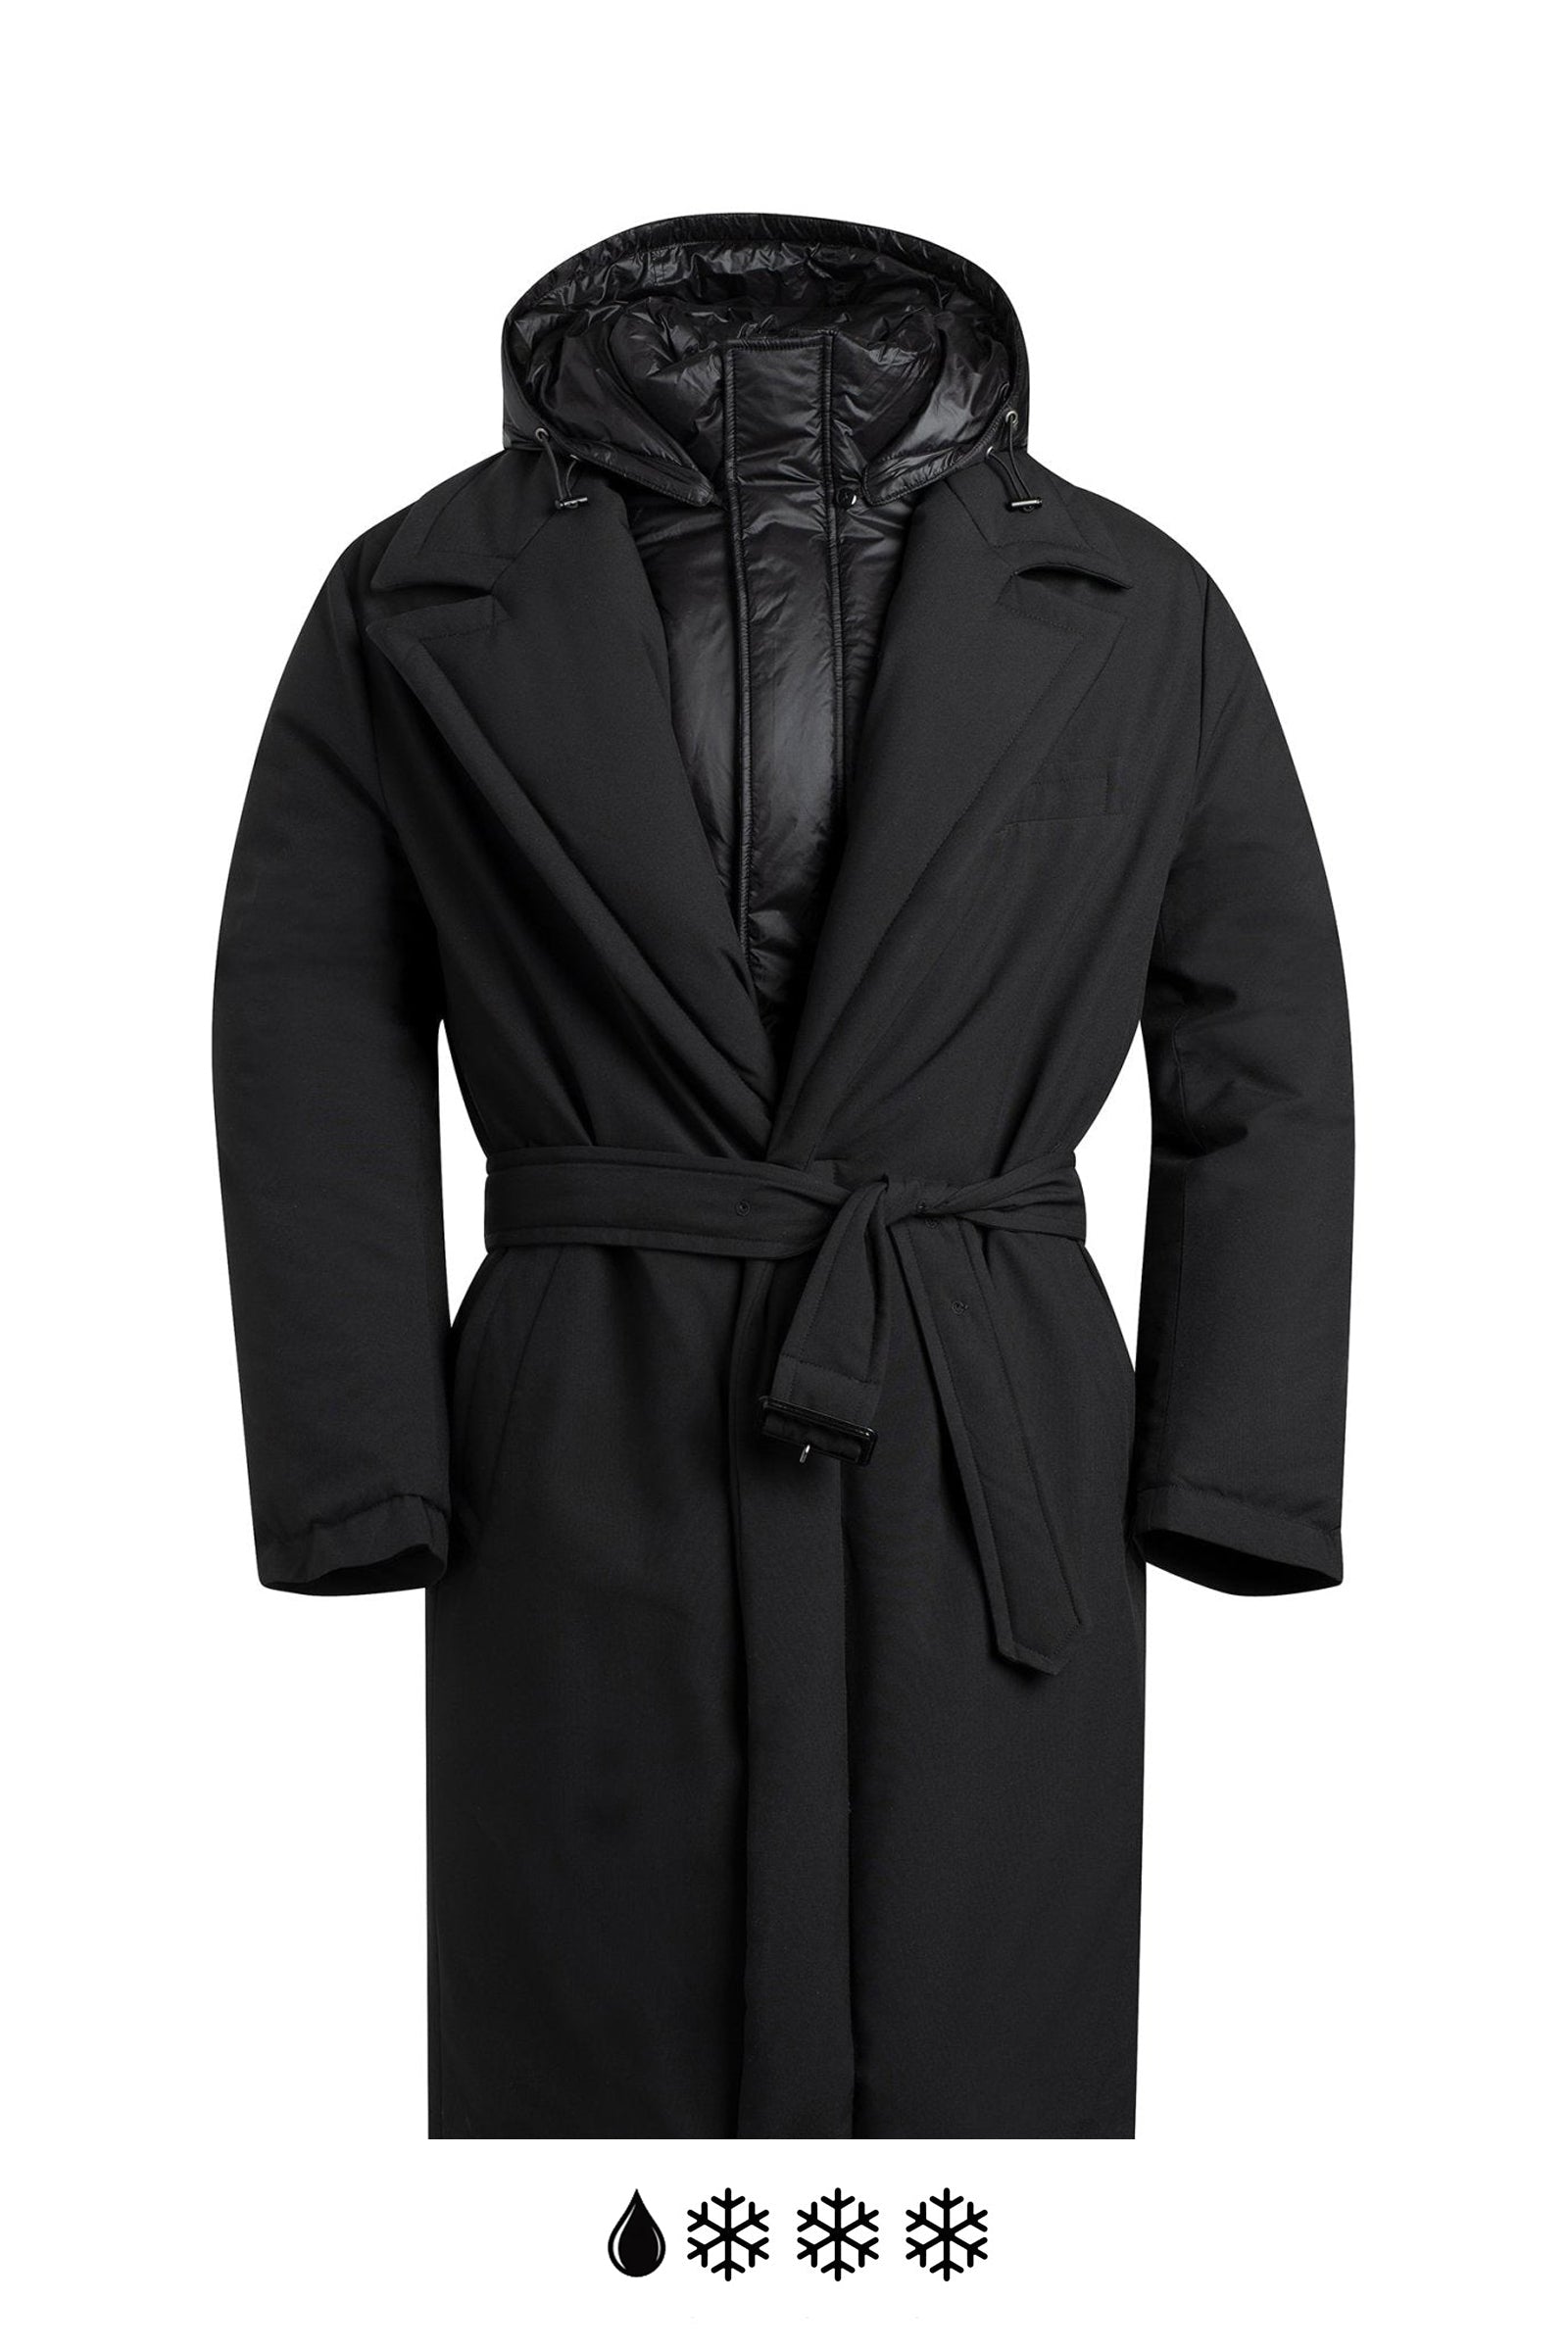 TYLER BLACK TRENCH COAT WITH PRIMALOFT LINING - Cardinal of Canada-CA - Tyler black trenchcoat